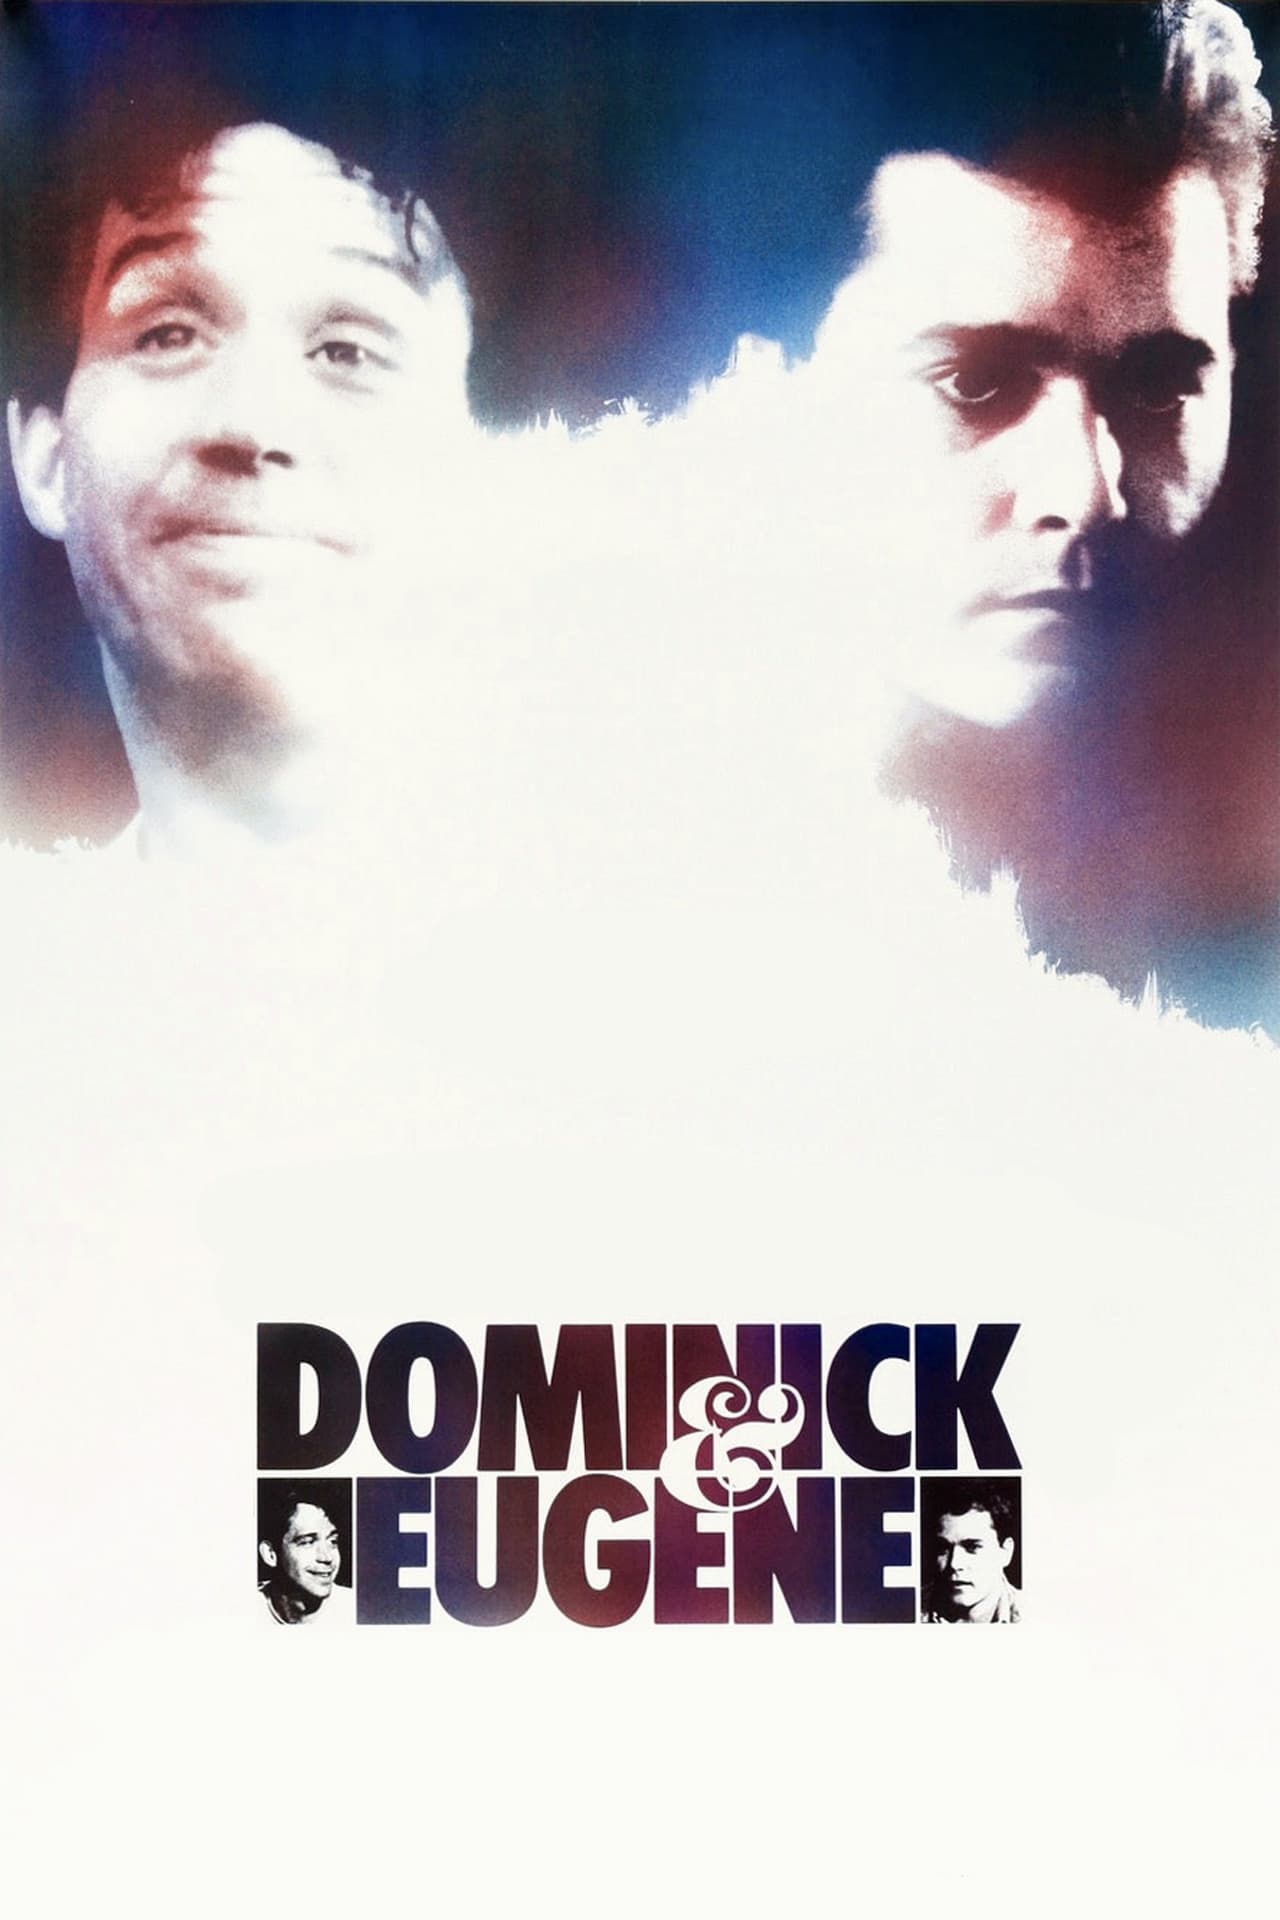 Dominick and Eugene (1988)